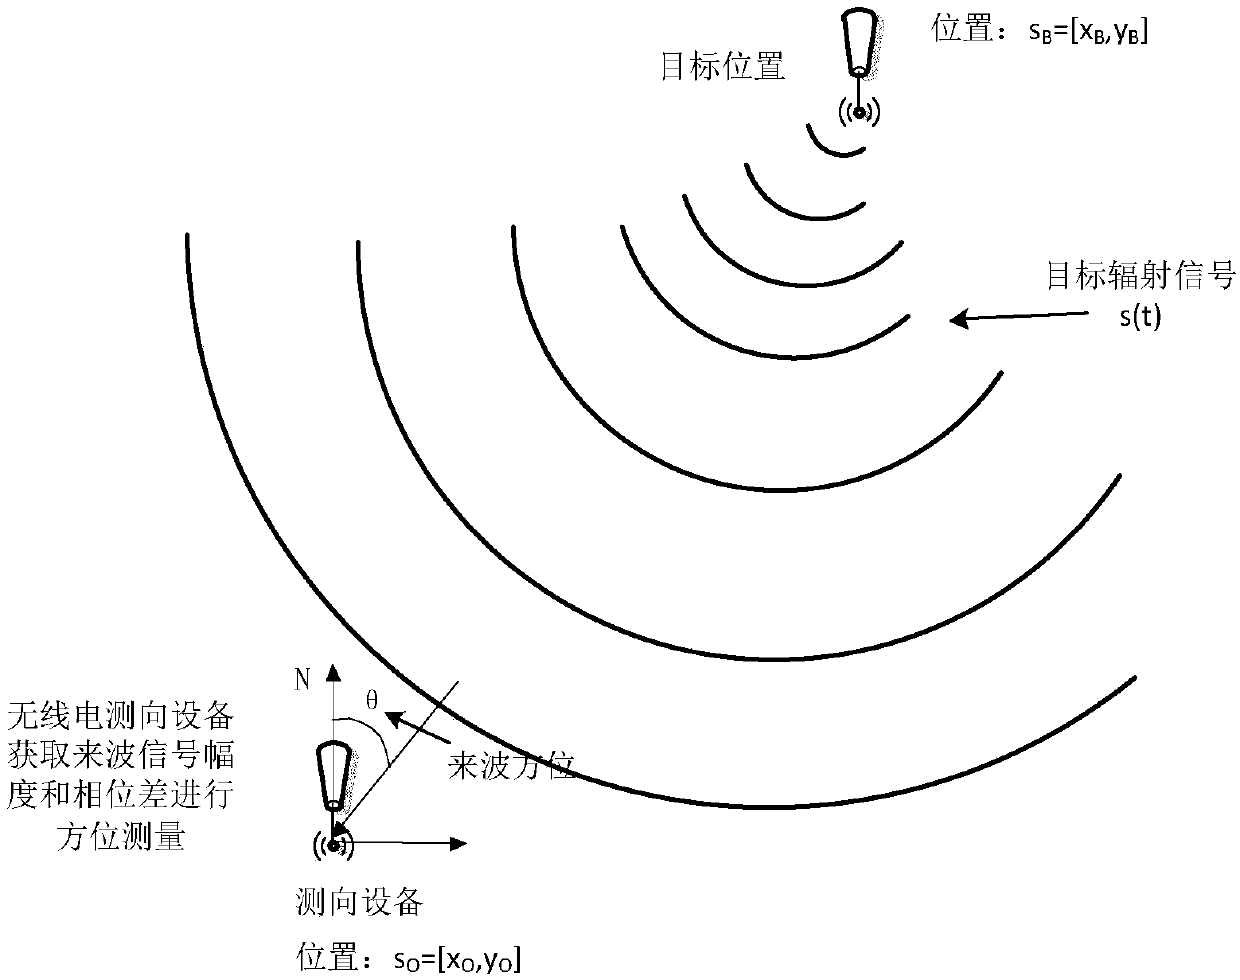 Amplitude-phase combined measuring method measuring coning wave direction information